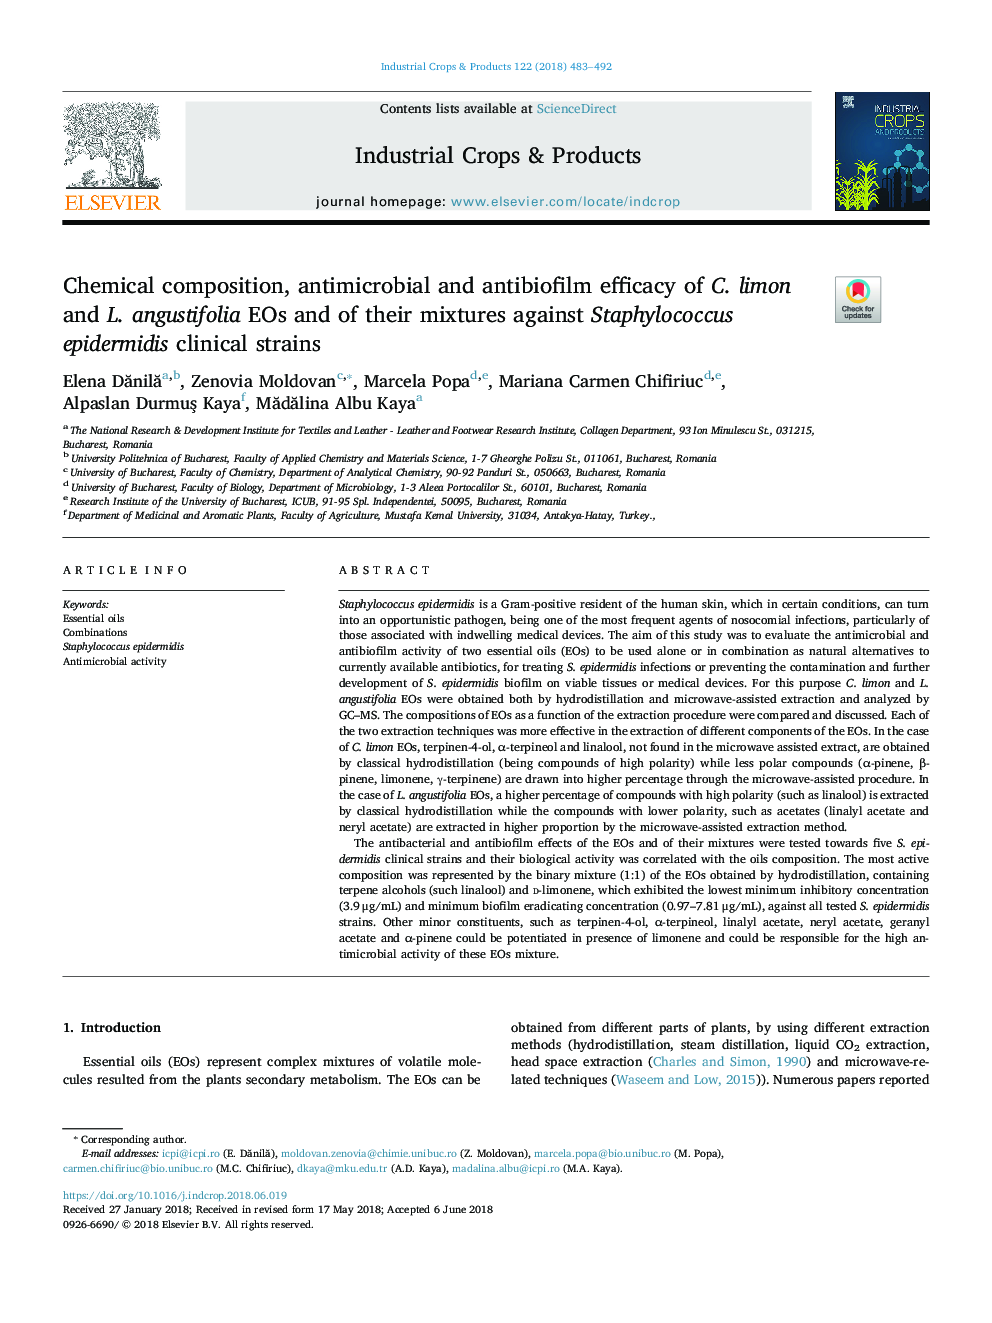 Chemical composition, antimicrobial and antibiofilm efficacy of C. limon and L. angustifolia EOs and of their mixtures against Staphylococcus epidermidis clinical strains